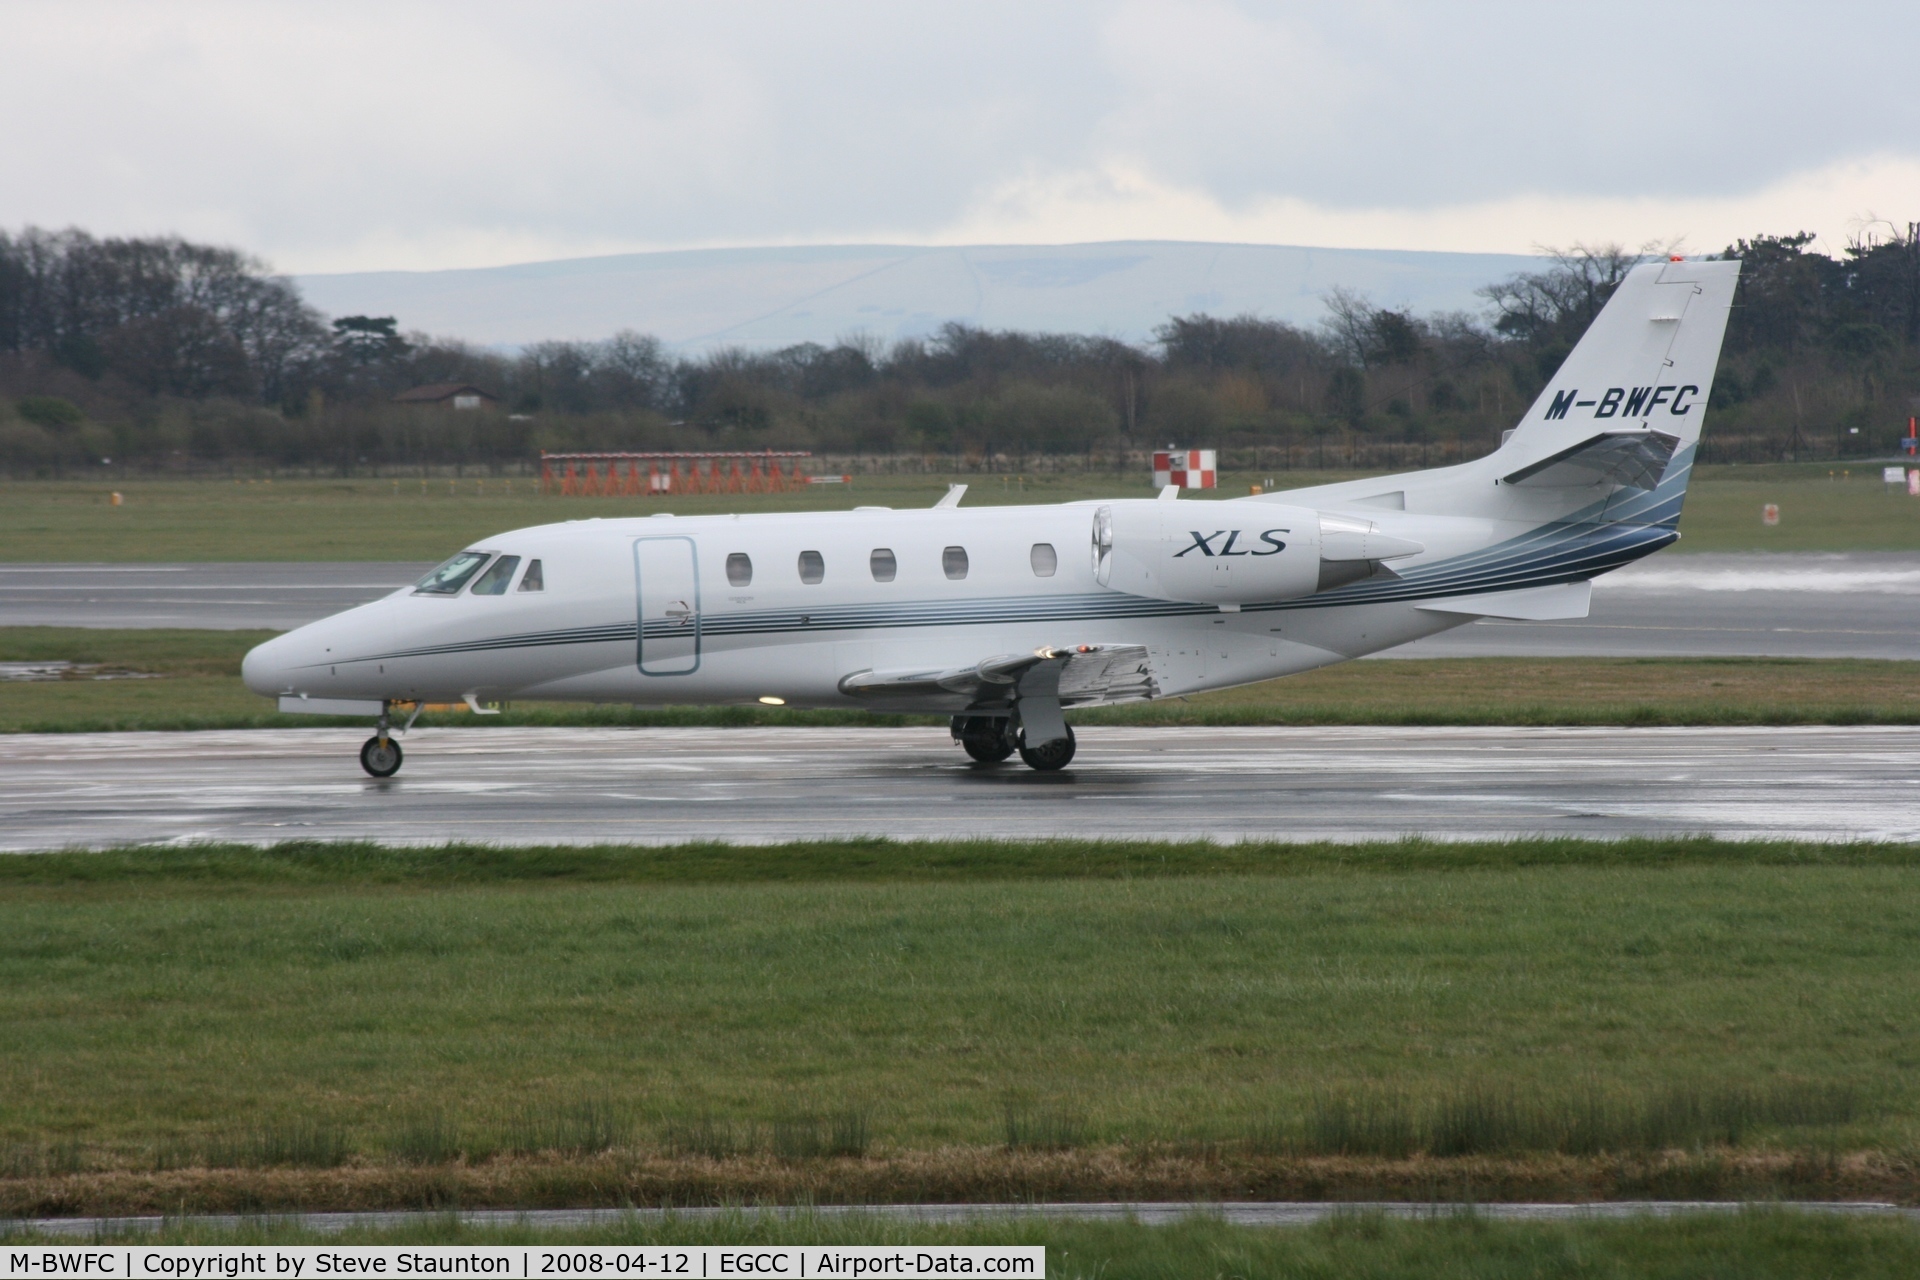 M-BWFC, Cessna 560XL Citation XLS C/N 560-5690, Taken at Manchester Airport on a typical showery April day